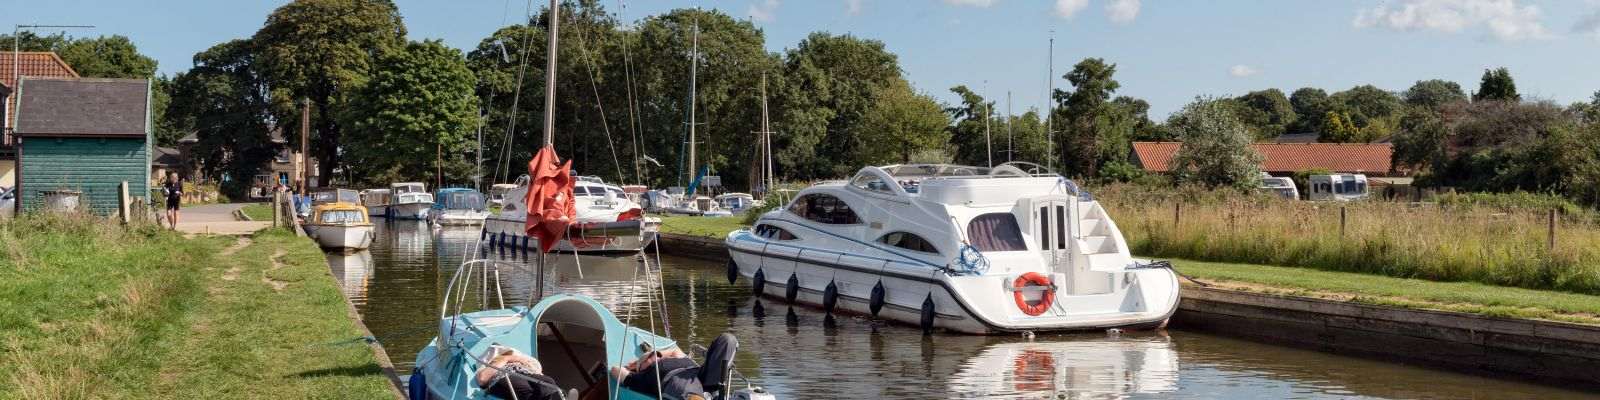 Holiday Cottages In The Norfolk Broads To Rent Self Catering